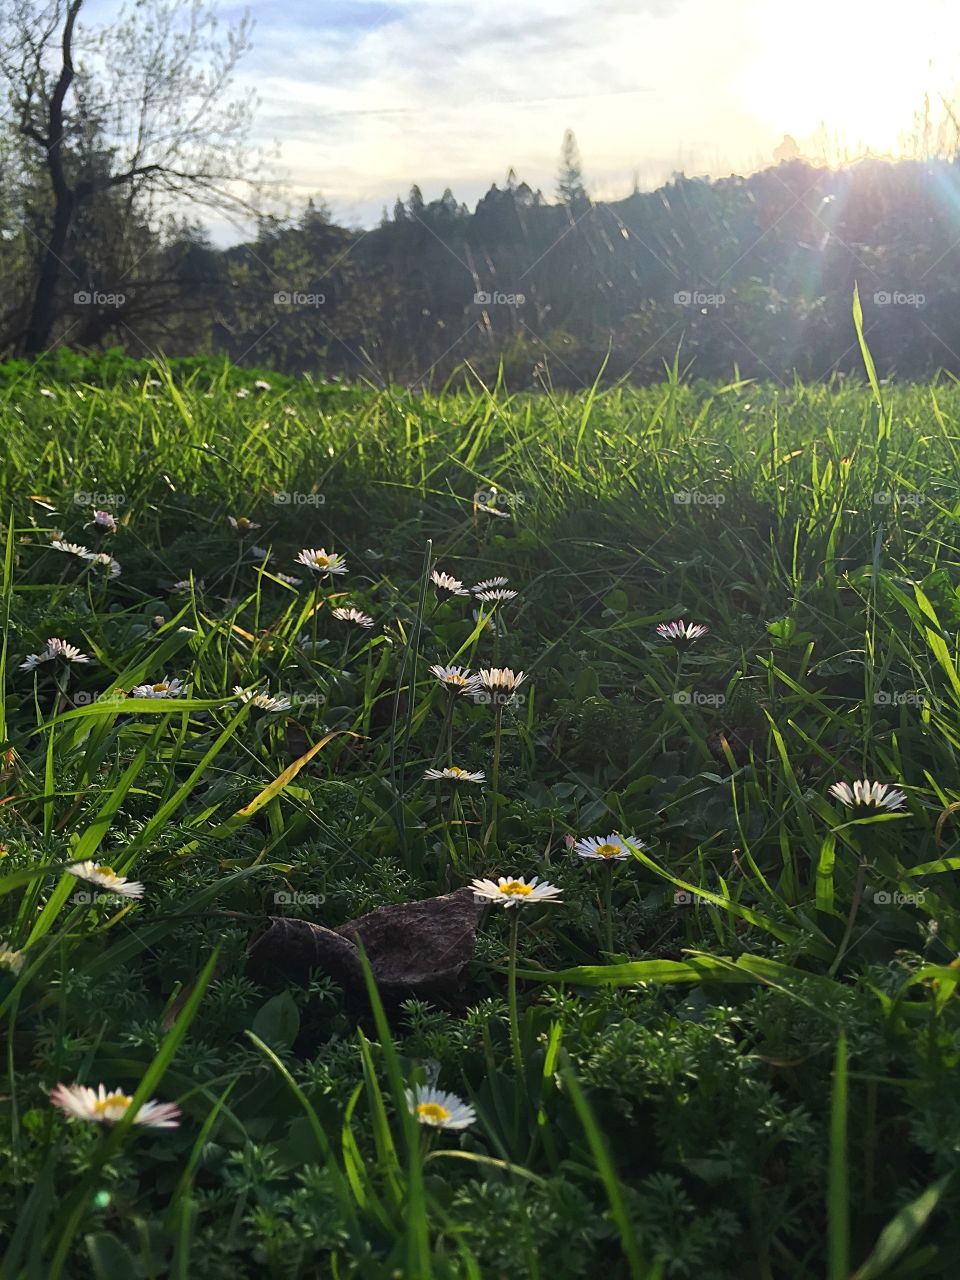 Field of grass and flowers